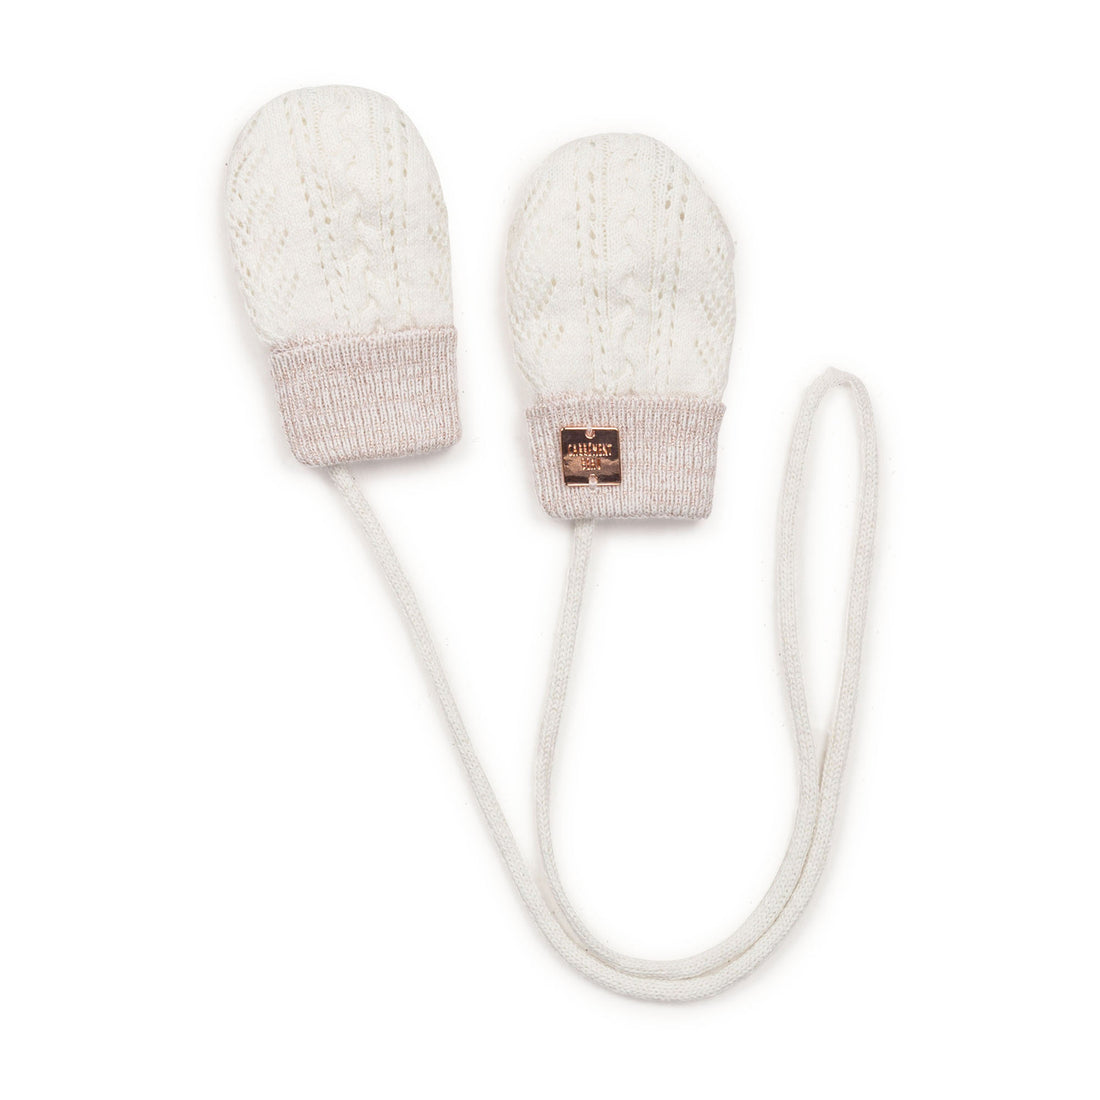 carrément-beau-pull-on-hat-gloves-set-fall-1-off-white-carr-w1y08031-ow-t0- (2)